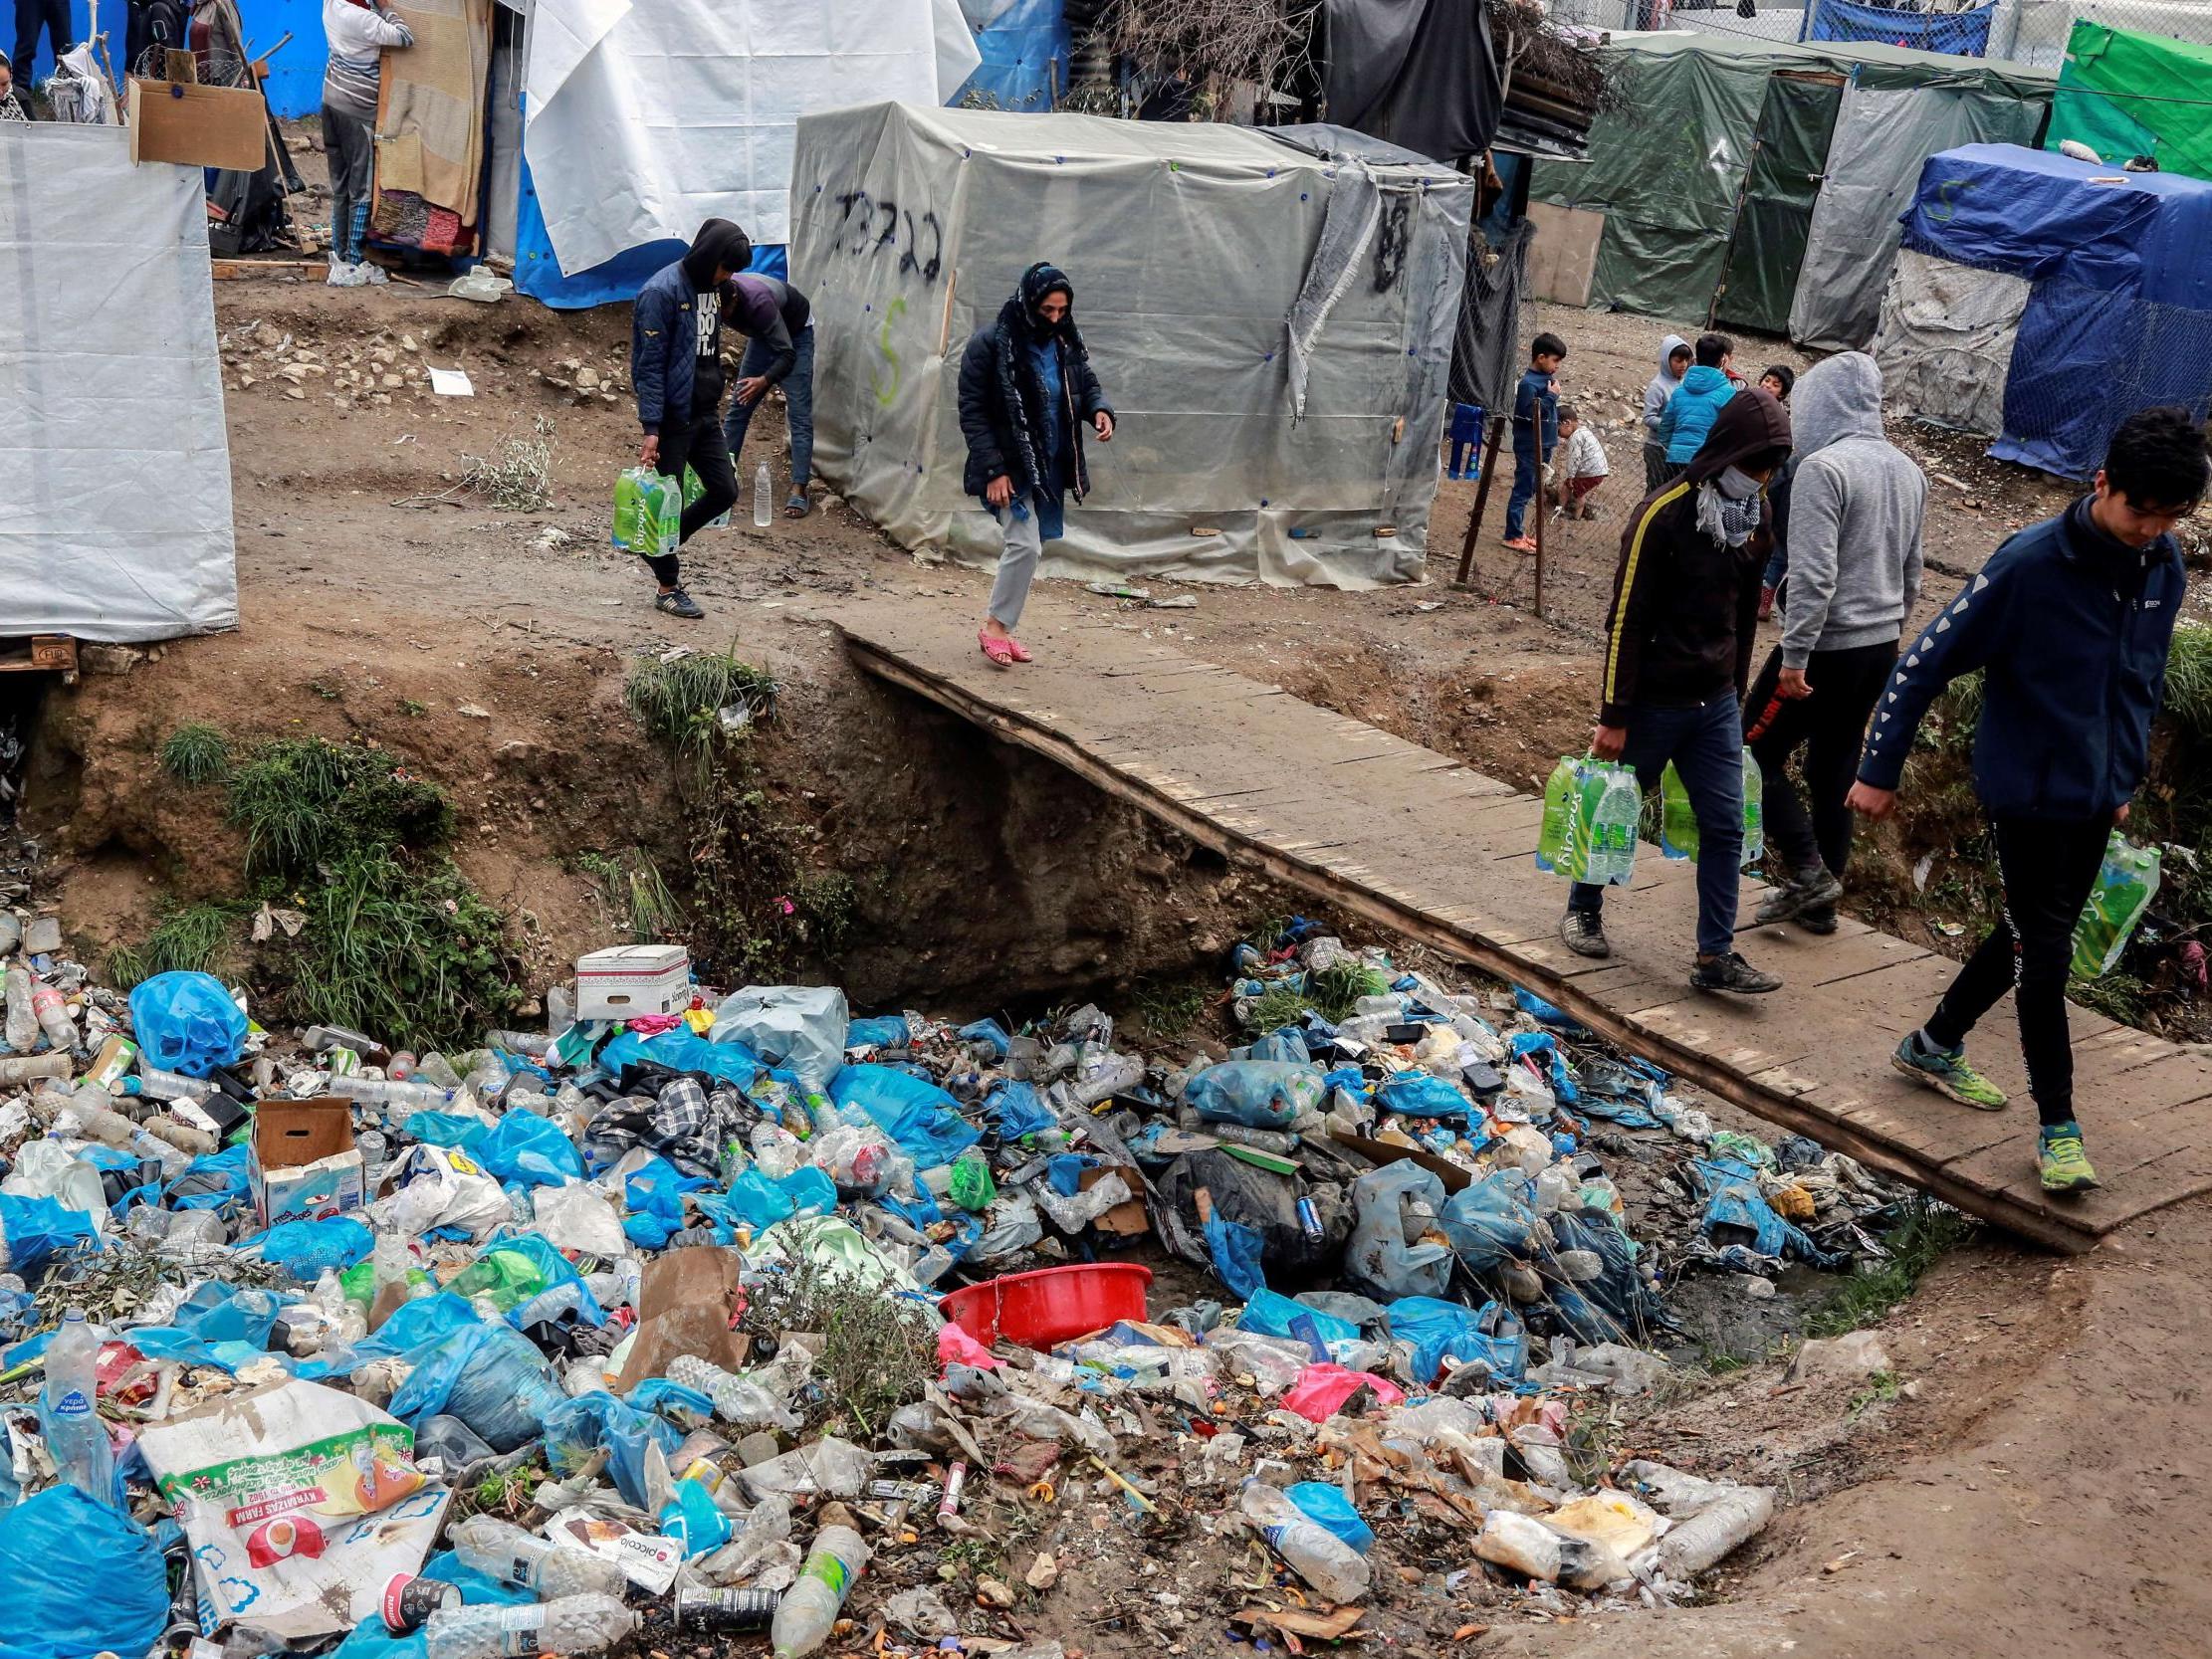 Refugees on the Greek island of Lesbos walk past piles of rubbish